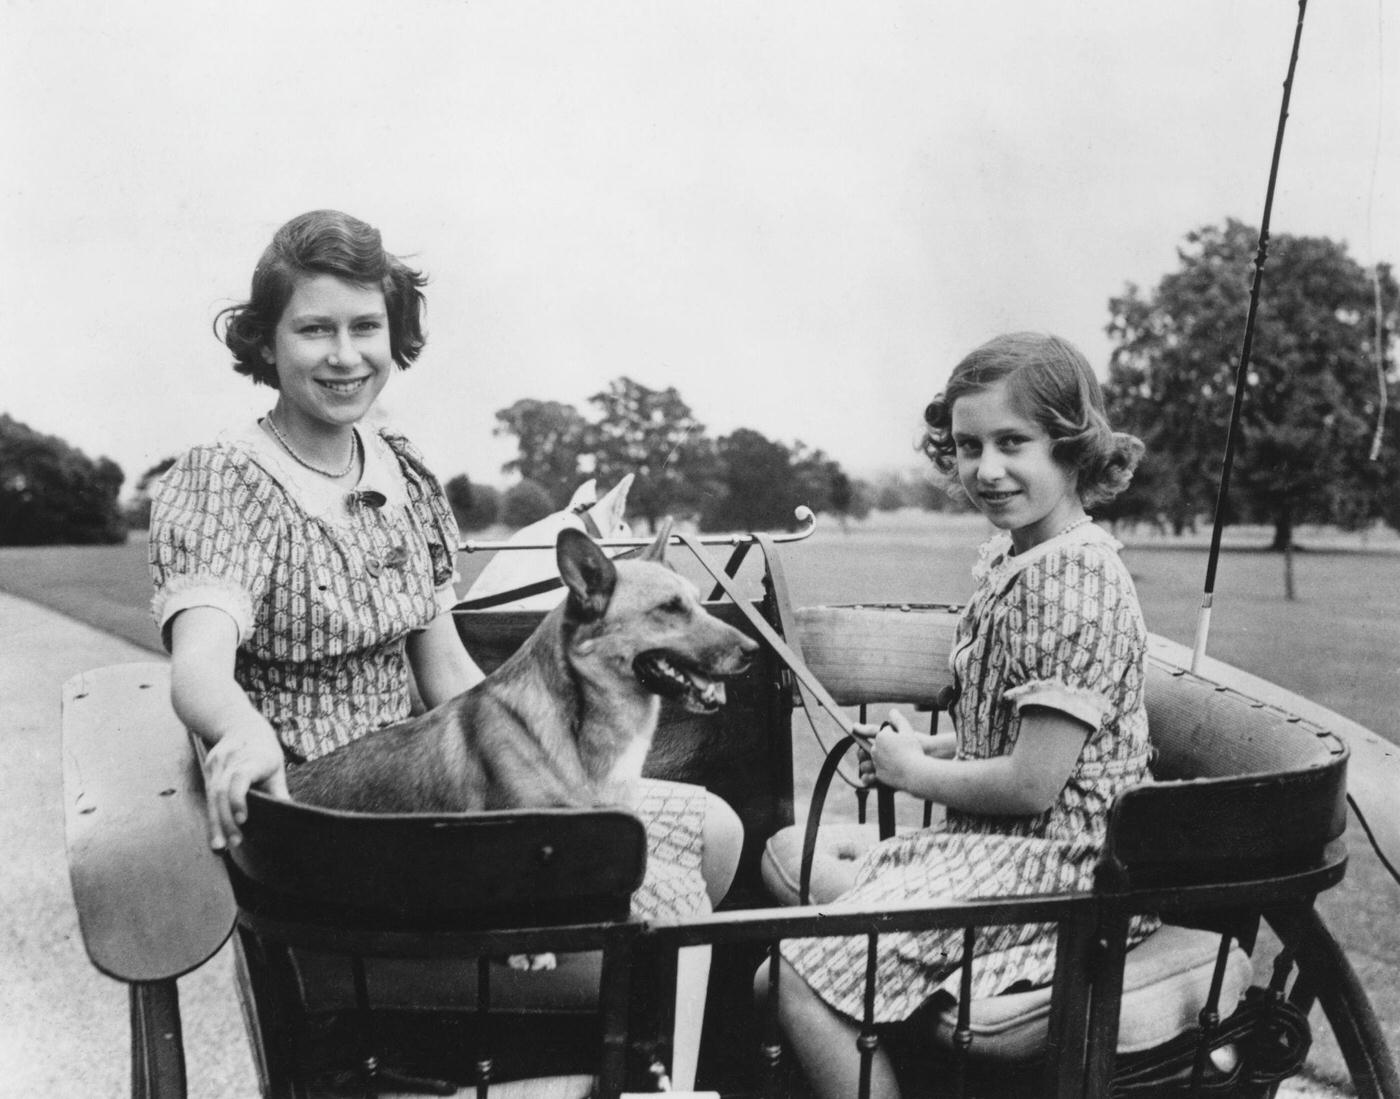 Princess Elizabeth (now Queen Elizabeth II, left) and her younger sister Princess Margaret Rose (1930-2002) in a carriage in the grounds of the Royal Lodge in Windsor Great Park, 4th July 1940.